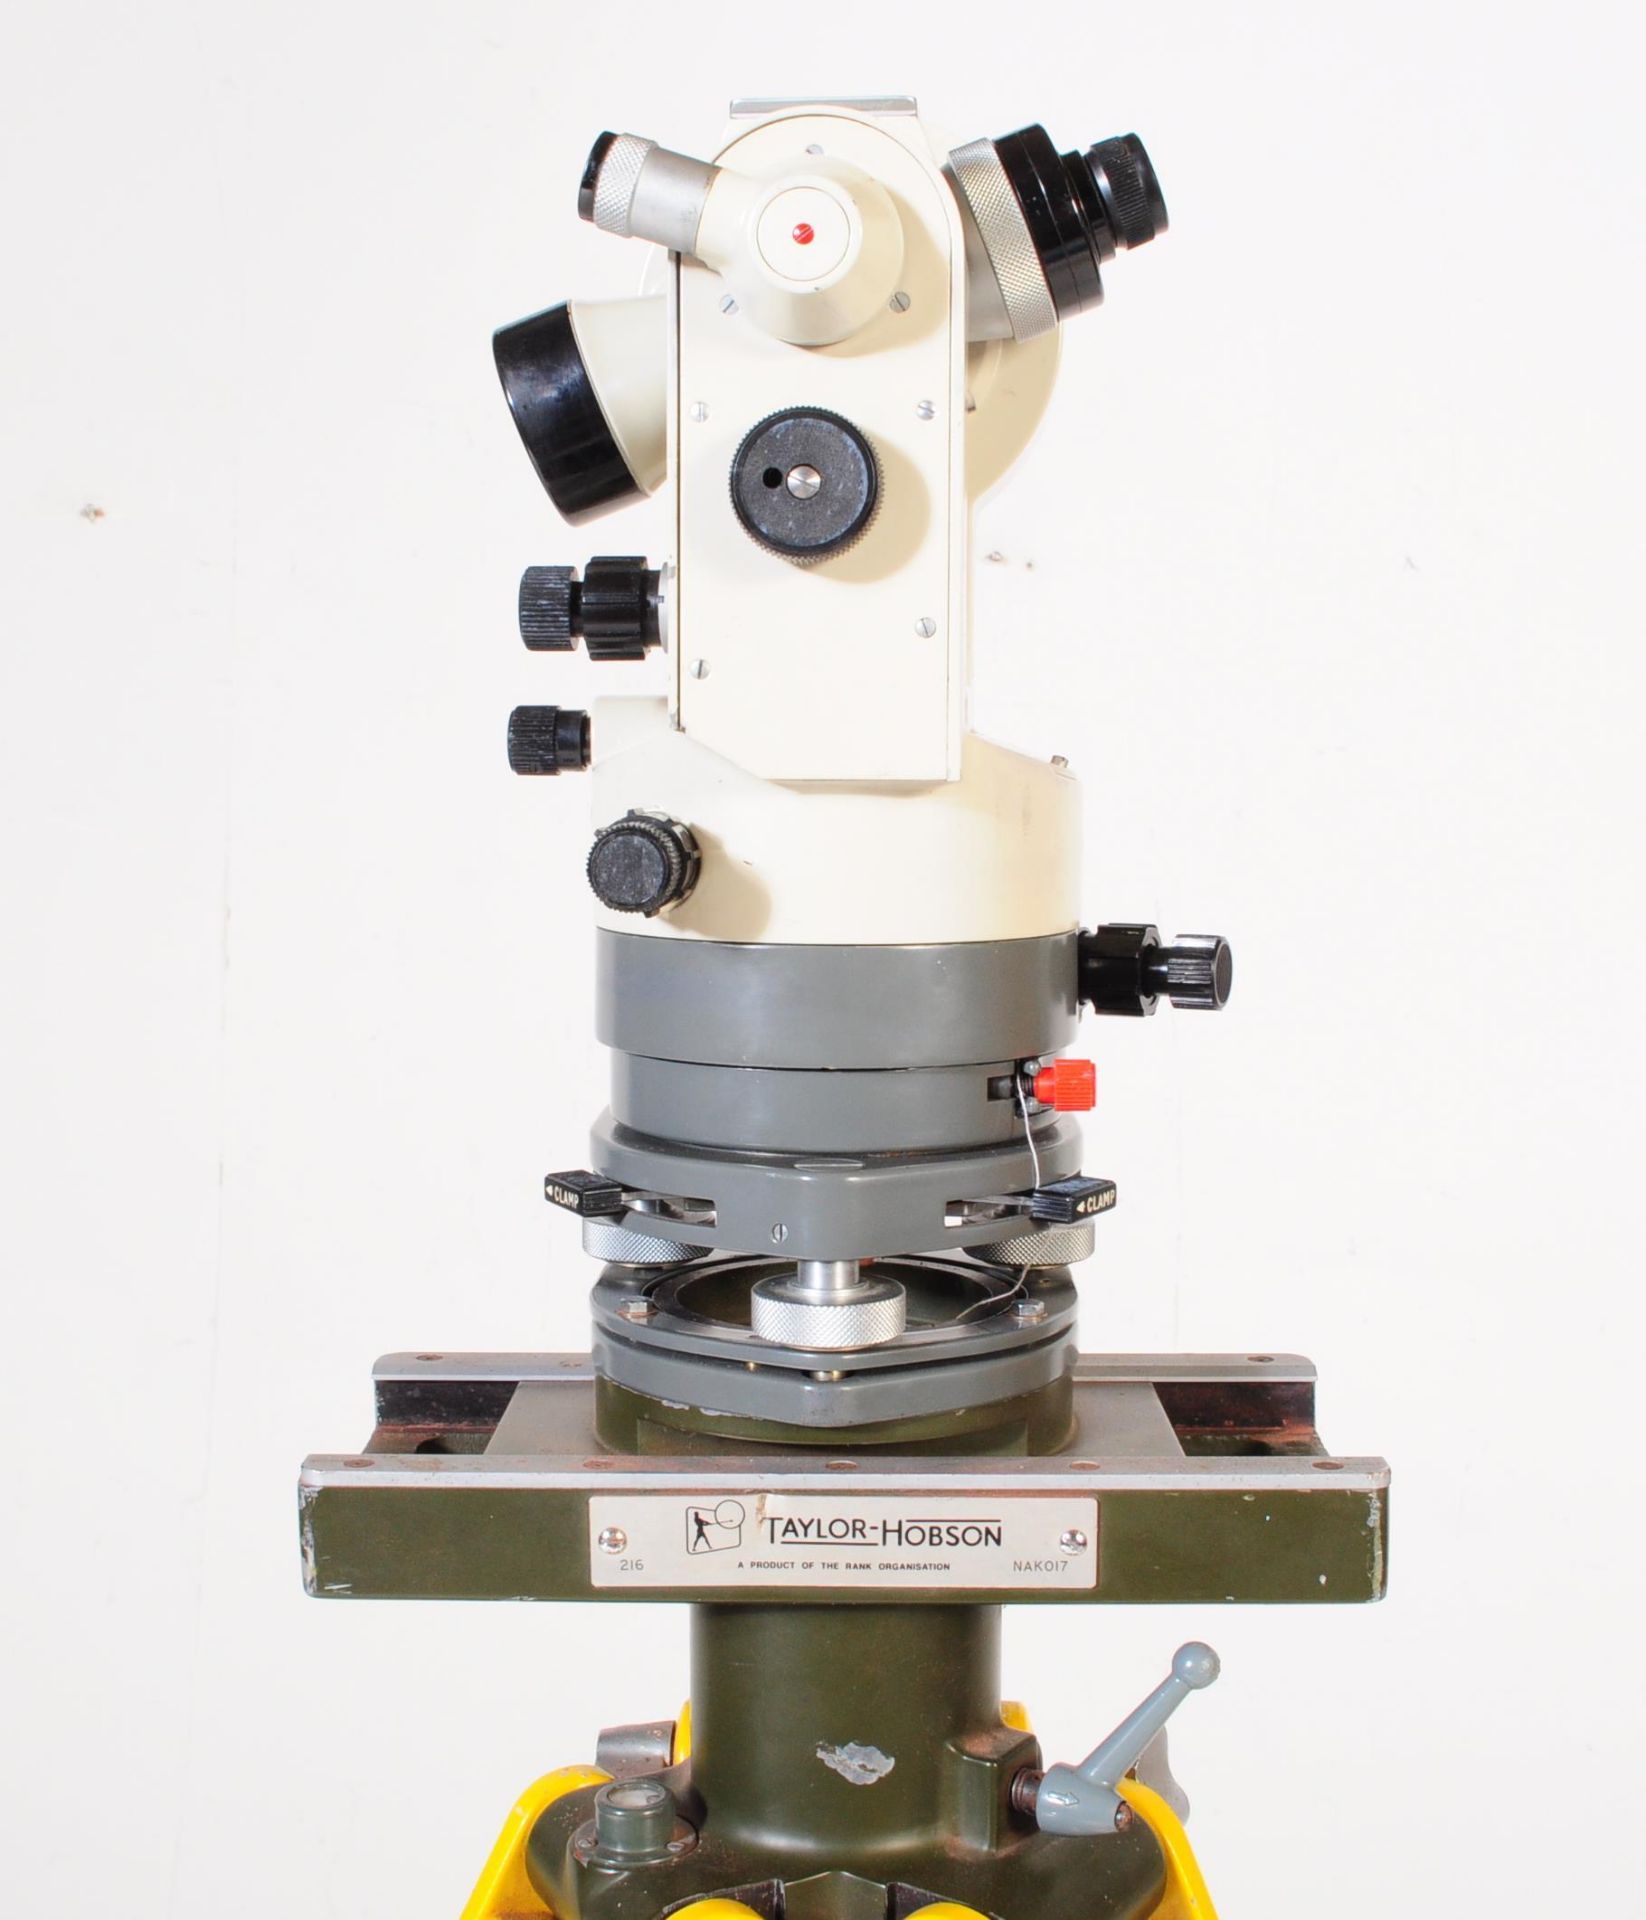 A HILGER & WATTS MICROPTIC THEODOLITE WITH TRIPOD STAND / CASE - Image 3 of 9